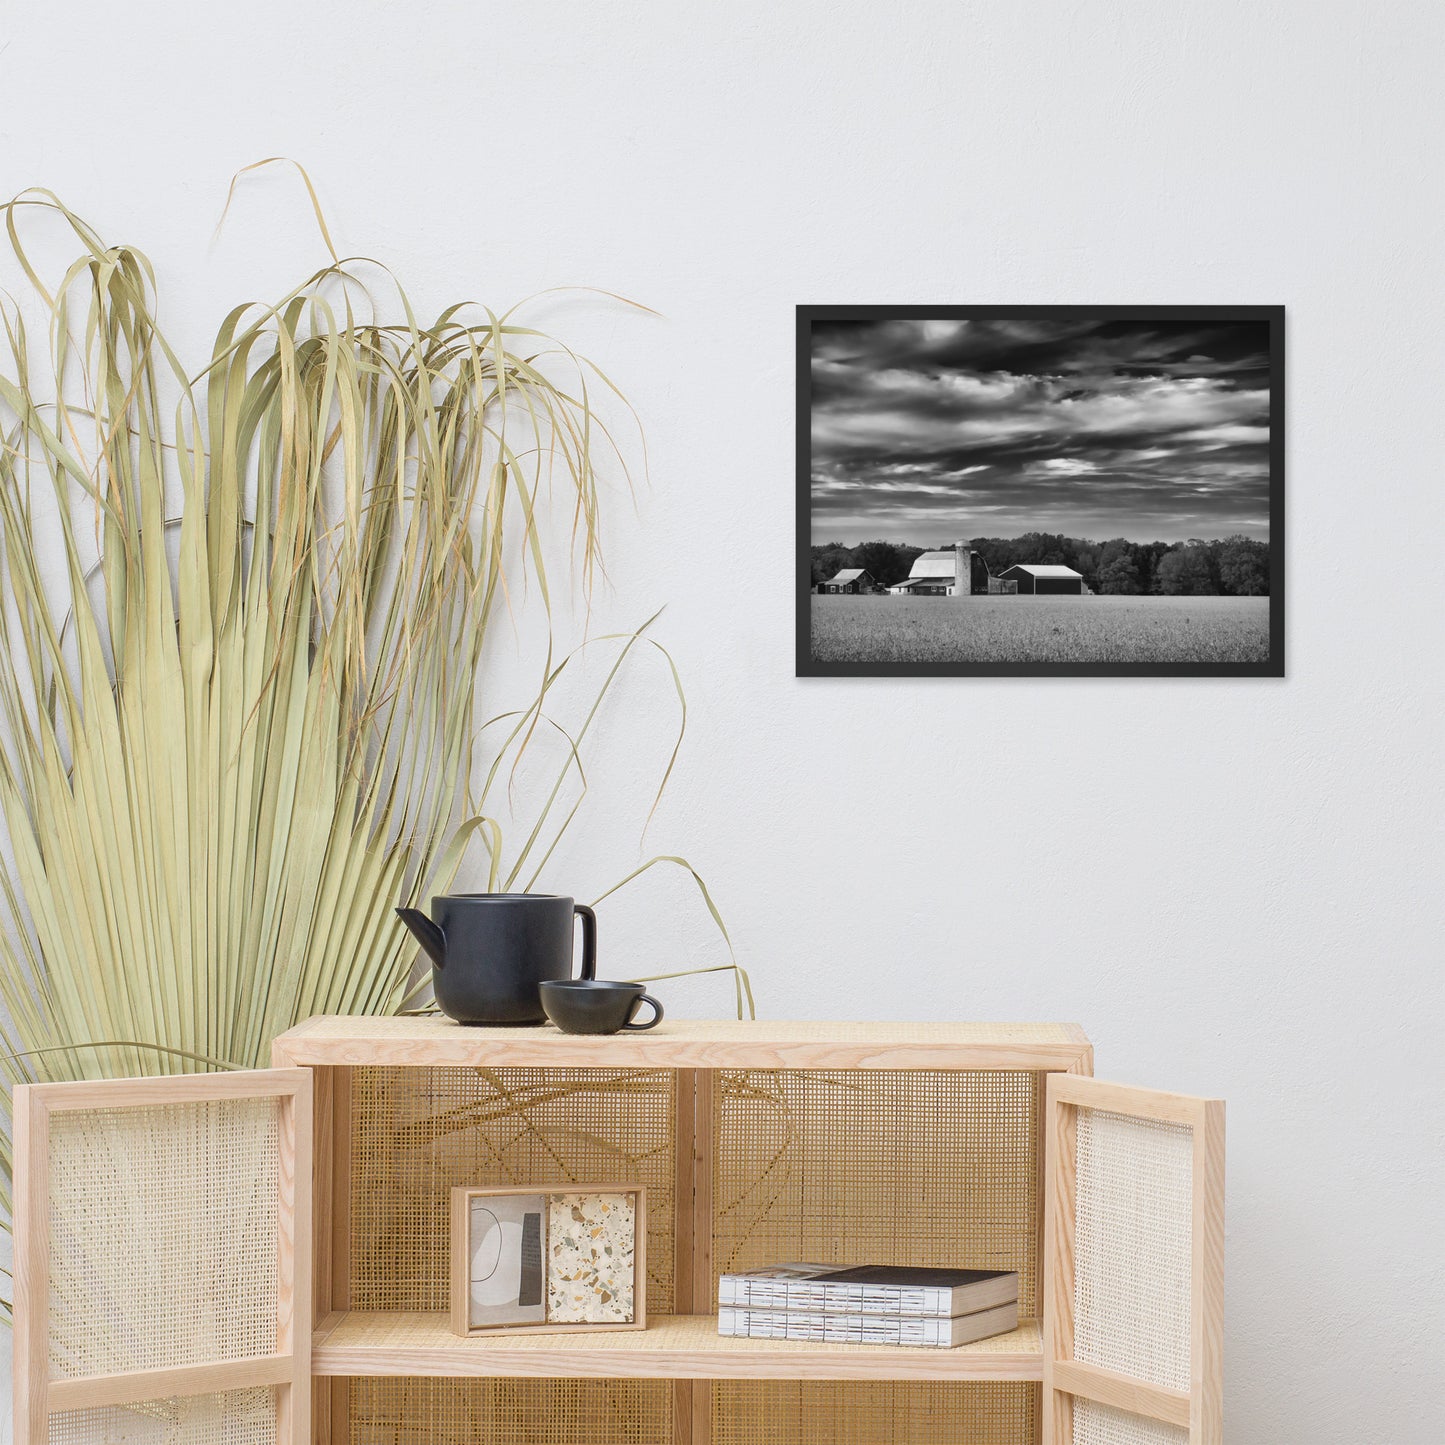 Barn in Field Black and White Framed Photo Paper Wall Art Prints